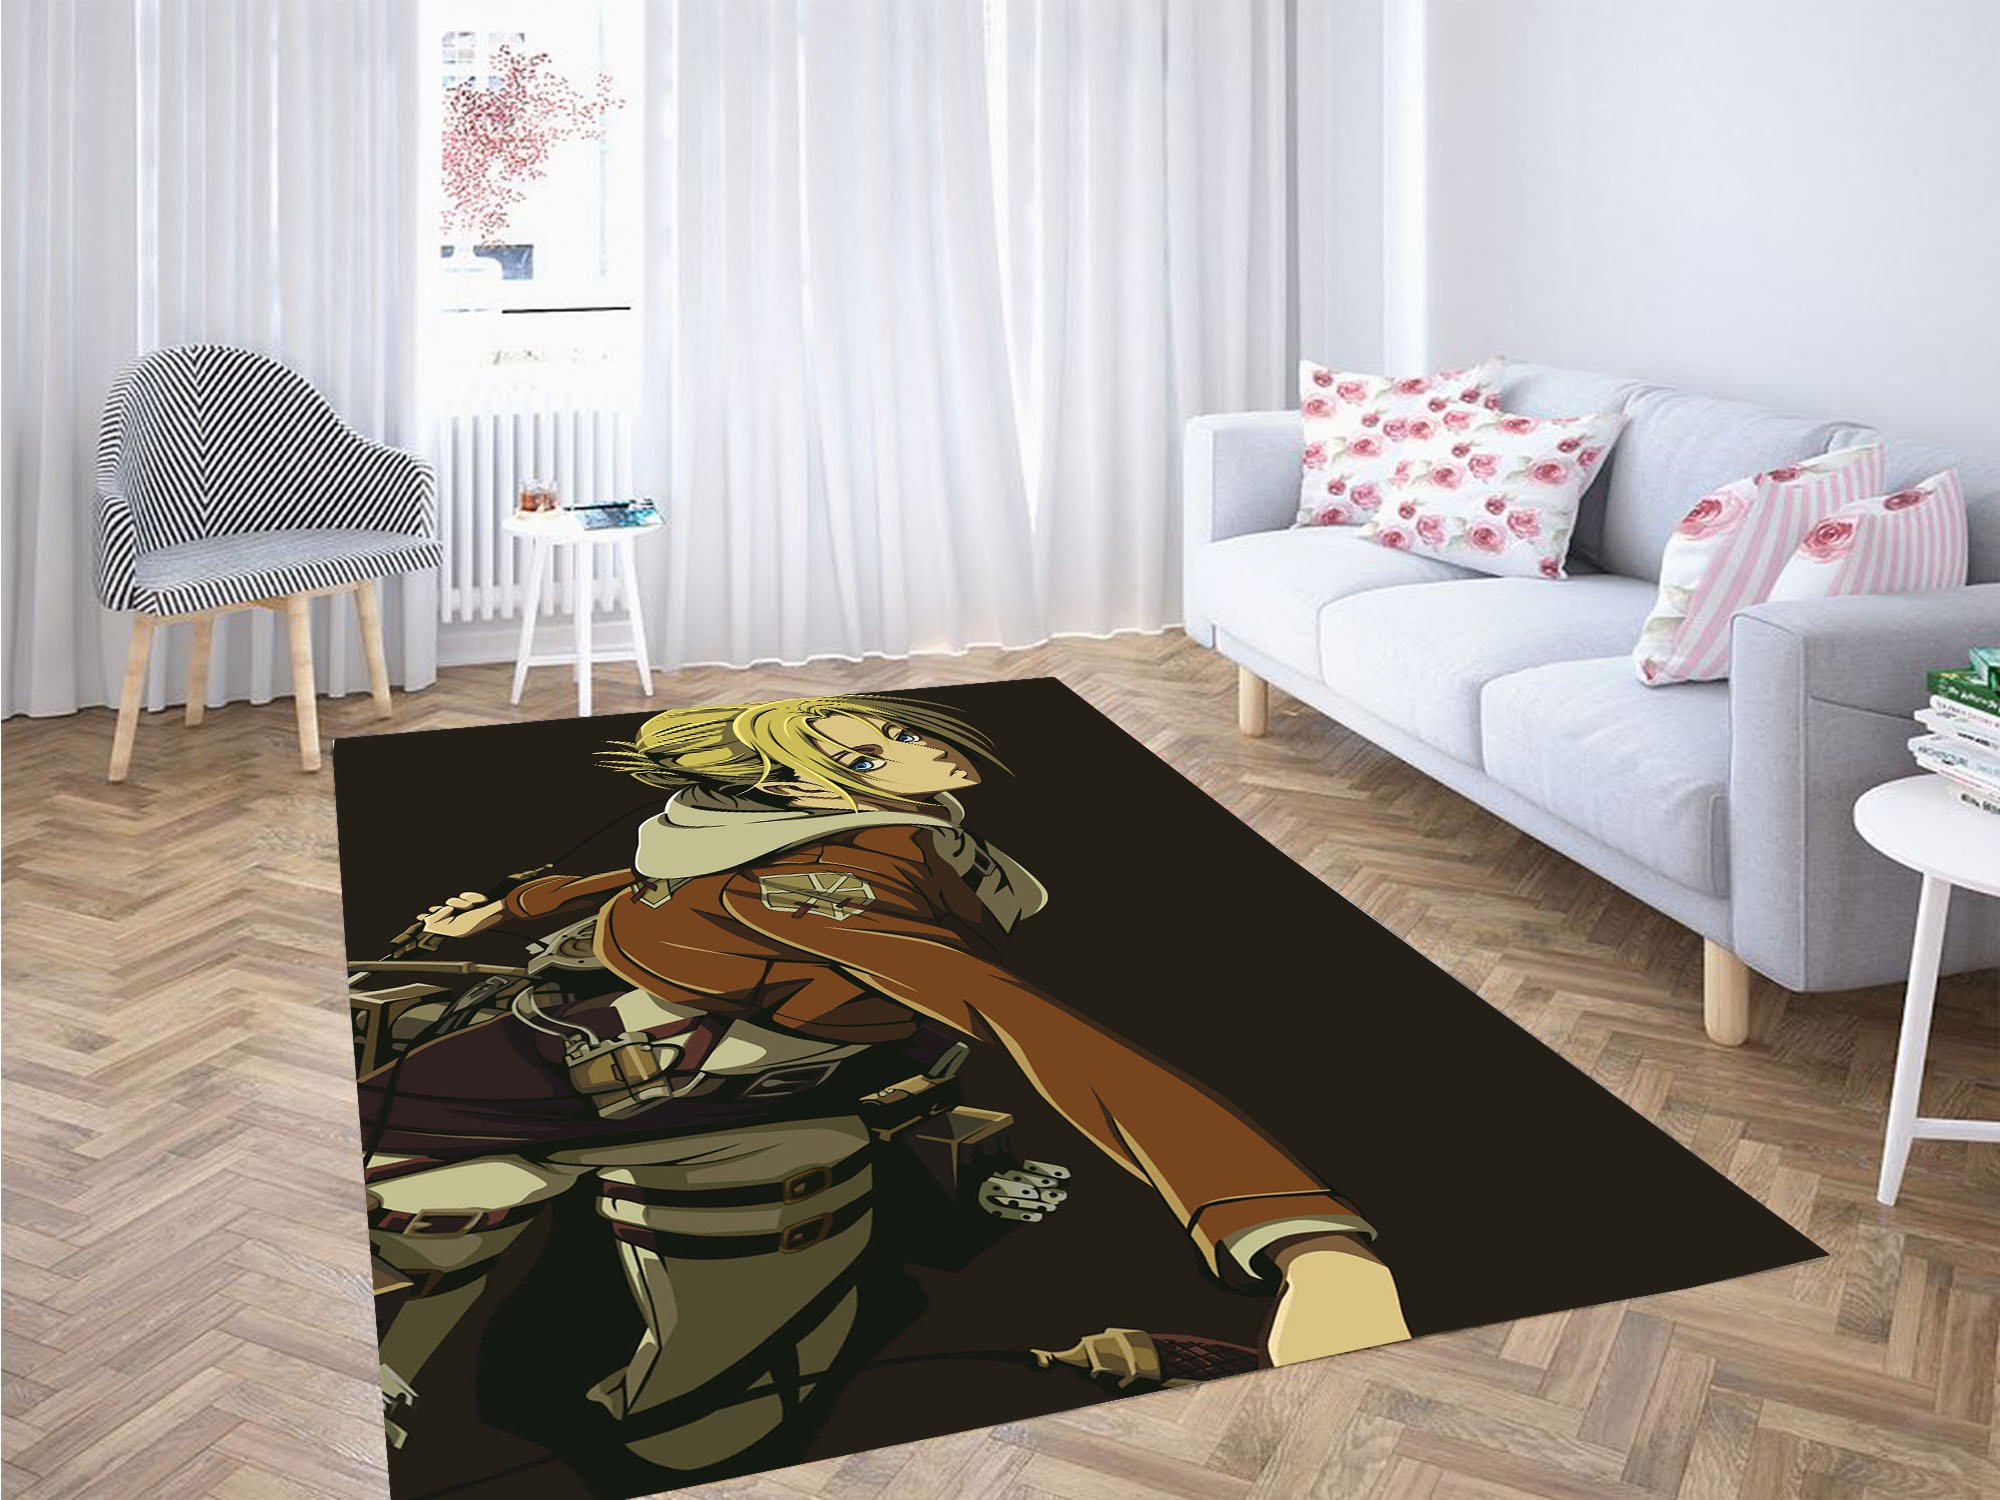 ANNIE LEONHART ATTACK ON TITAN RUGS – CUSTOM SIZE AND PRINTING